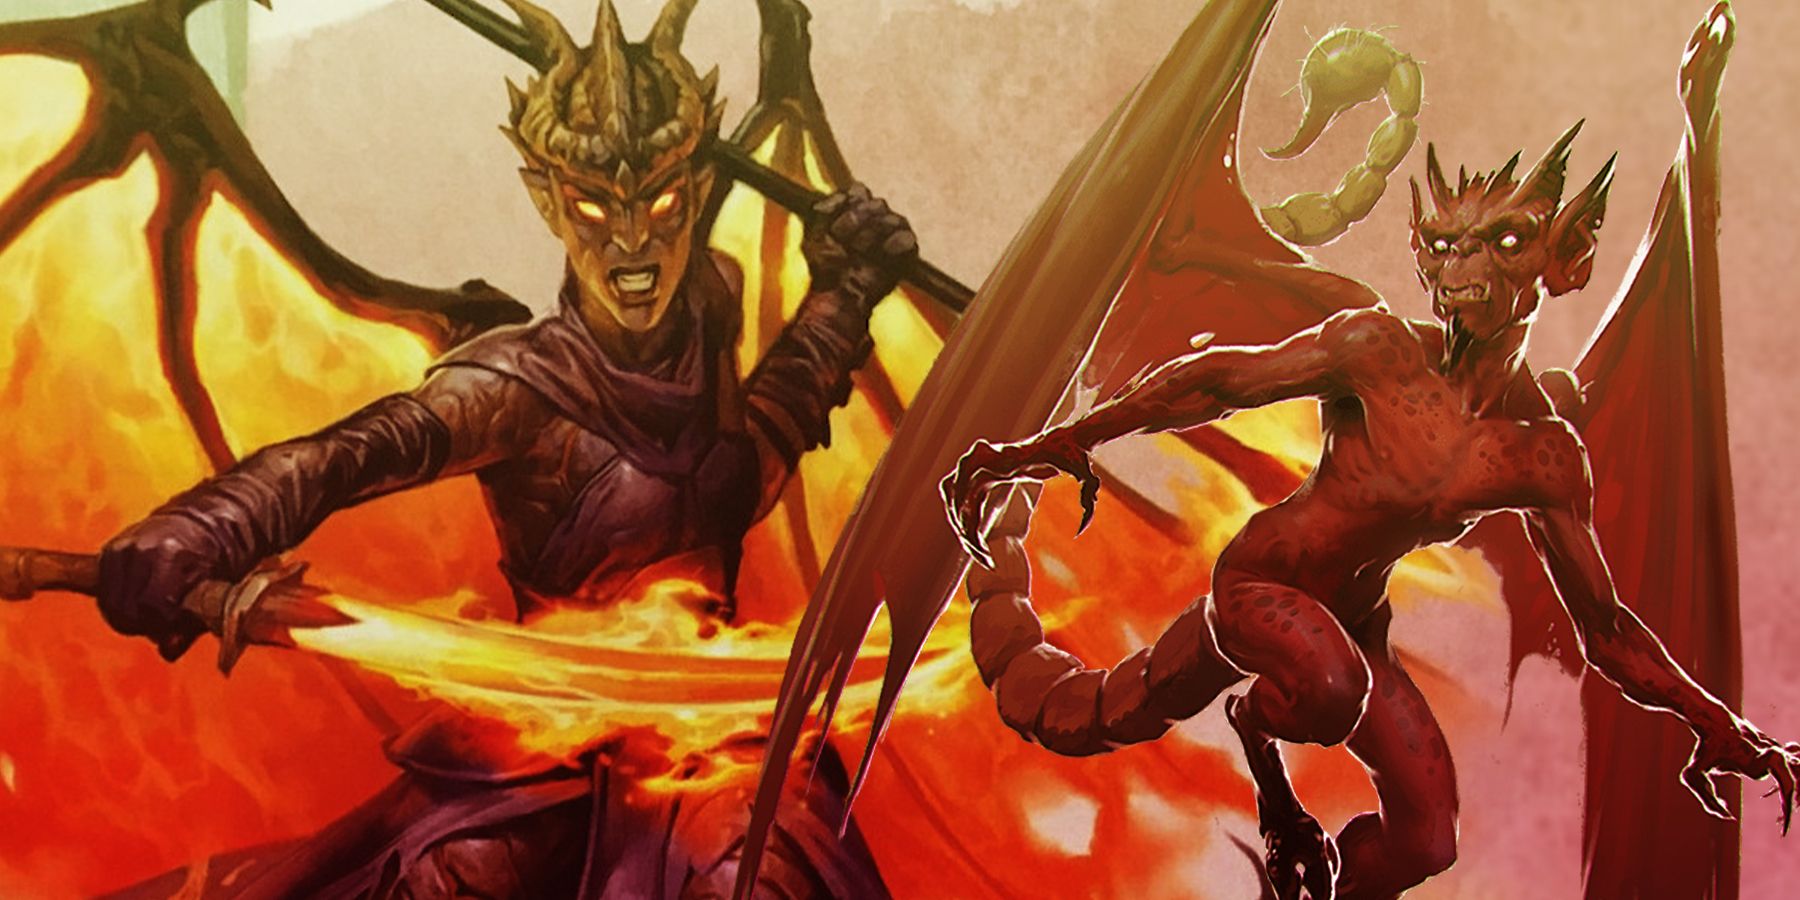 On the left, Azriel the demon wields a sword and spear, both engulfed in flame. On the right, a lone imp flies.